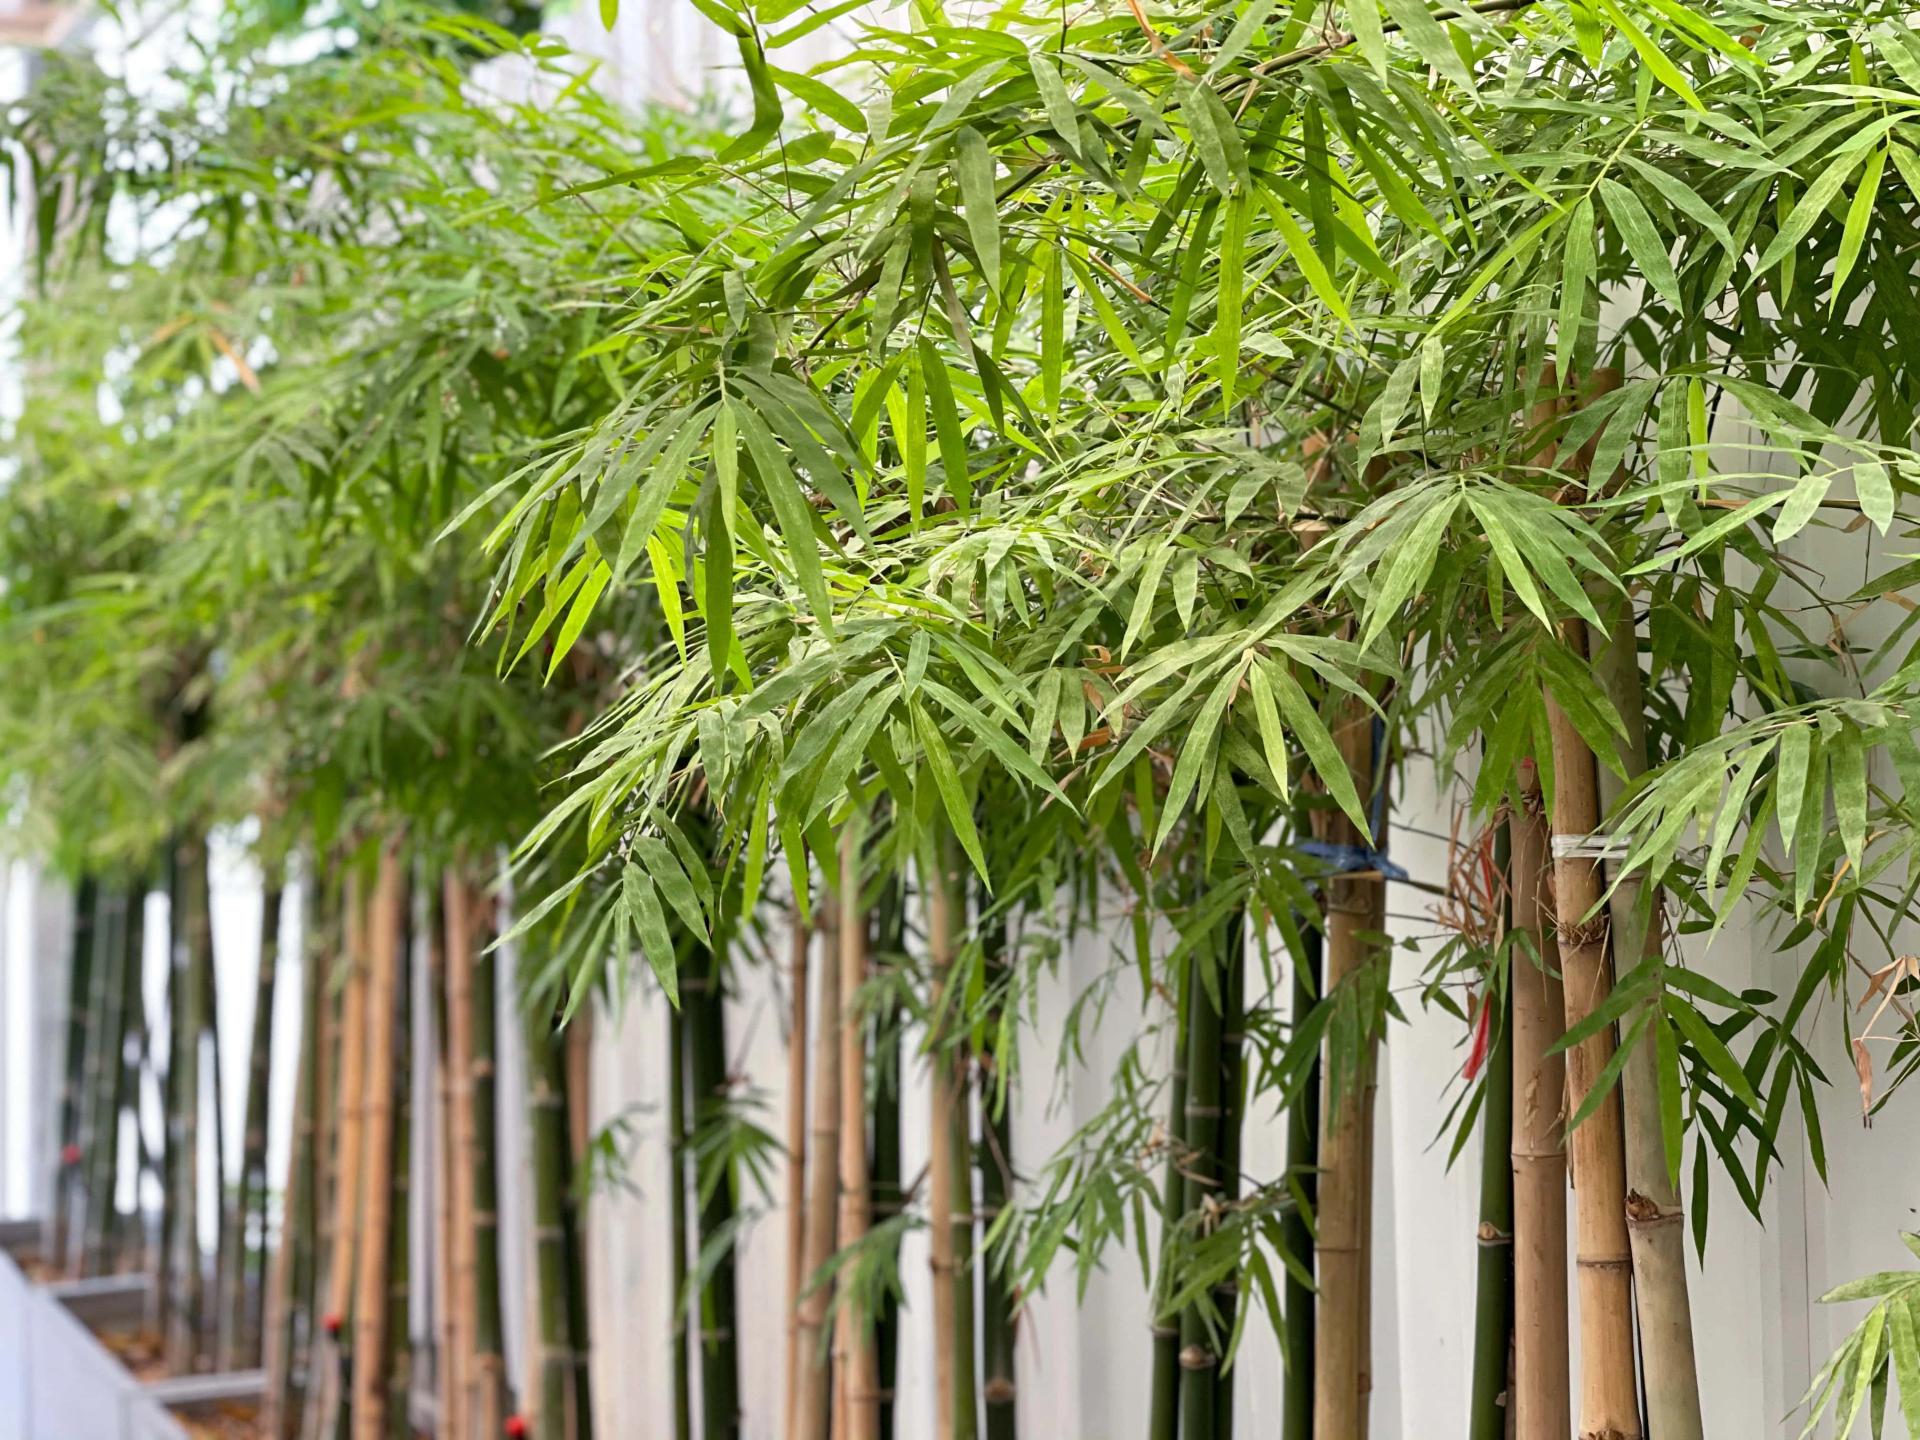 Bamboo in Pots